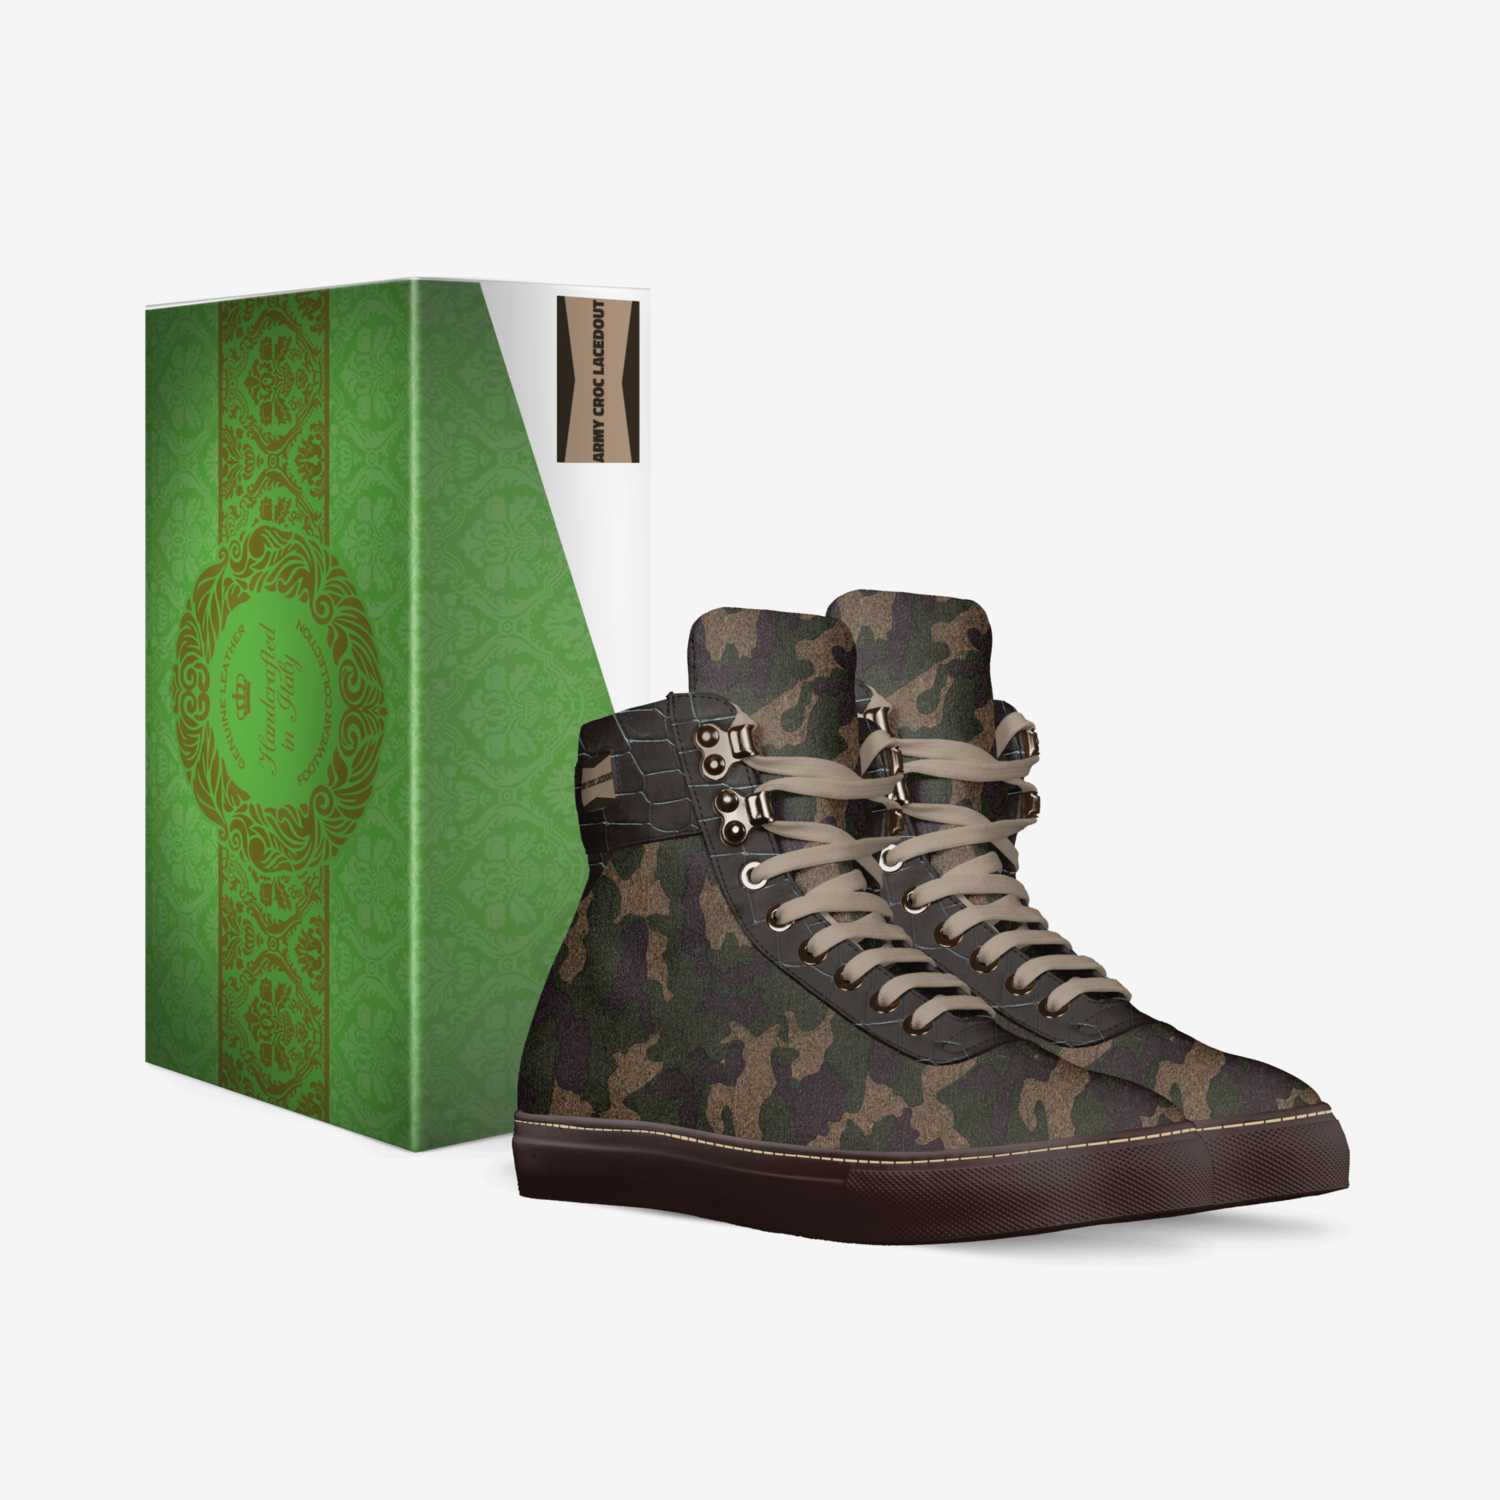 ARMY CROC LACEDOUT custom made in Italy shoes by Bytodd Sandford Ttee | Box view